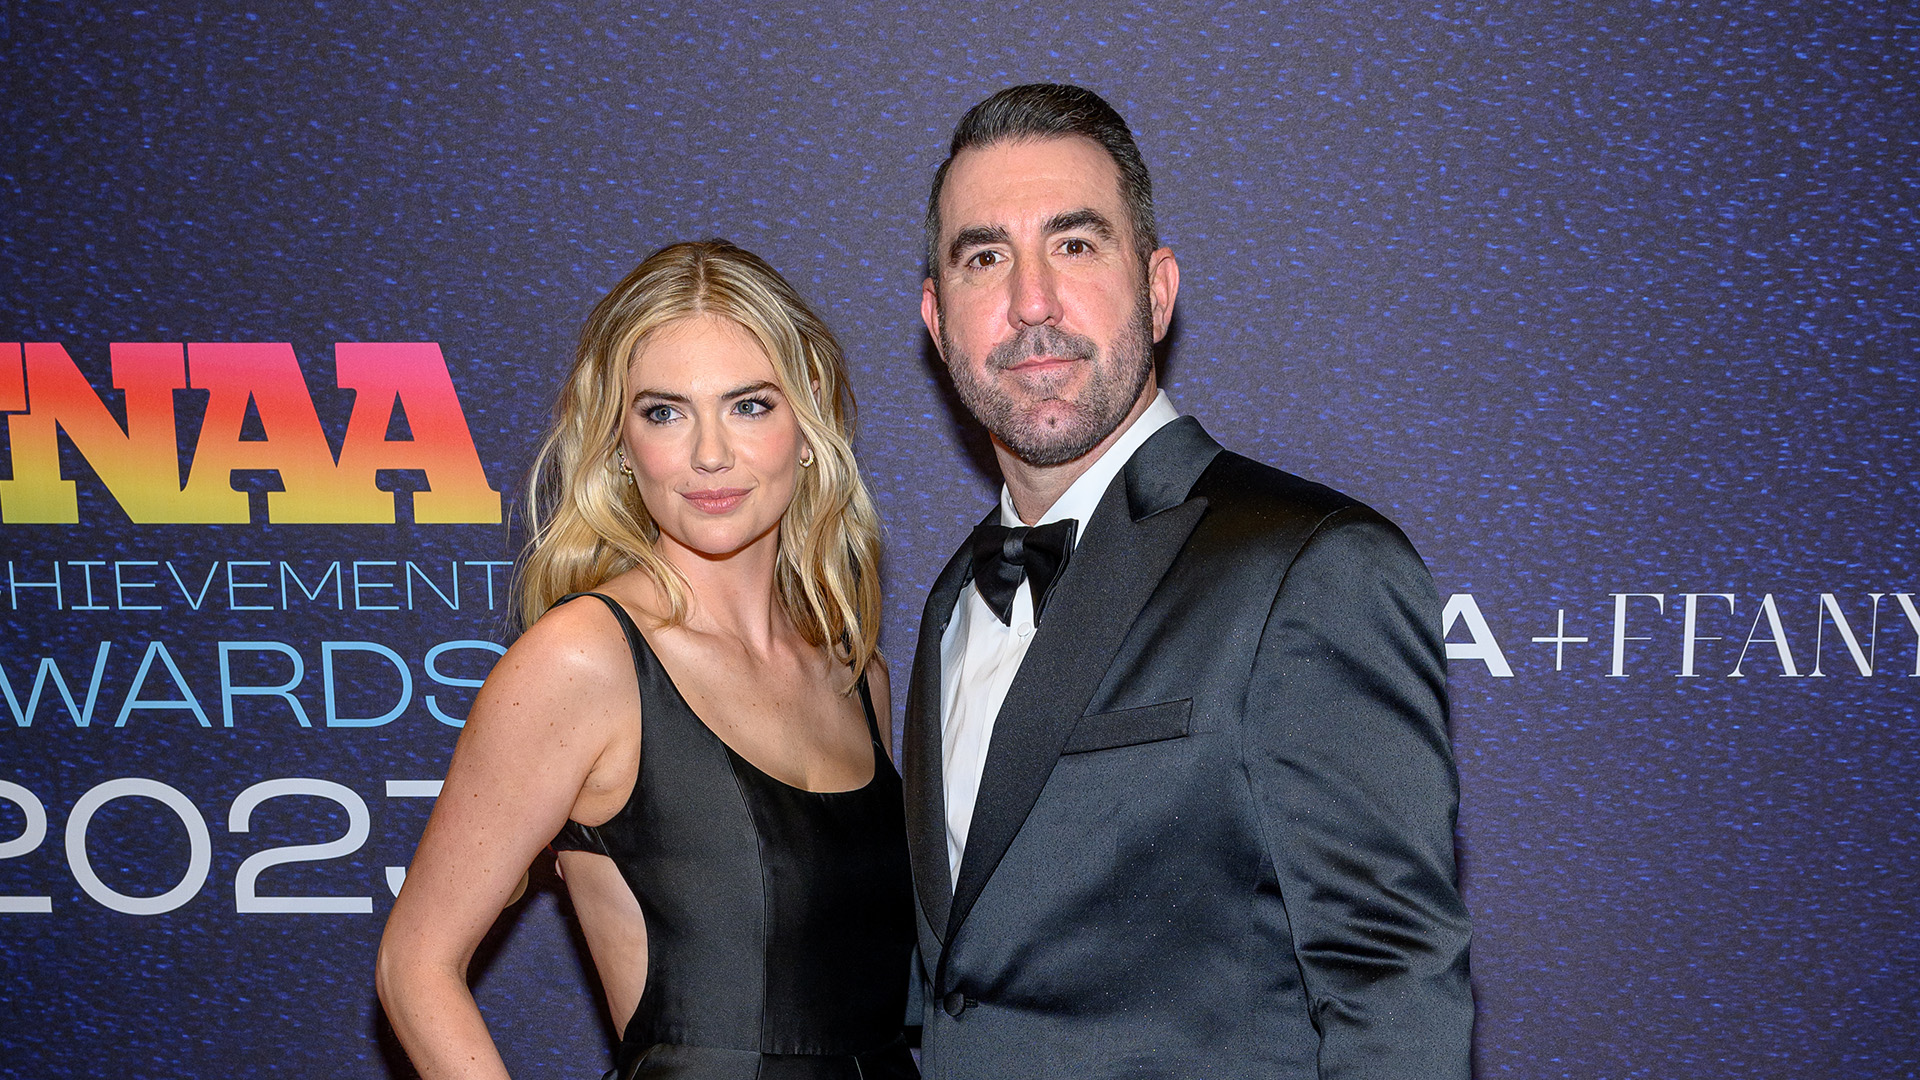 NEW YORK, NEW YORK - NOVEMBER 29: Kate Upton and Justin Verlander attends the 37th Annual Footwear News Achievement Awards at Cipriani South Street on November 29, 2023 in New York City. (Photo by Roy Rochlin/Getty Images)